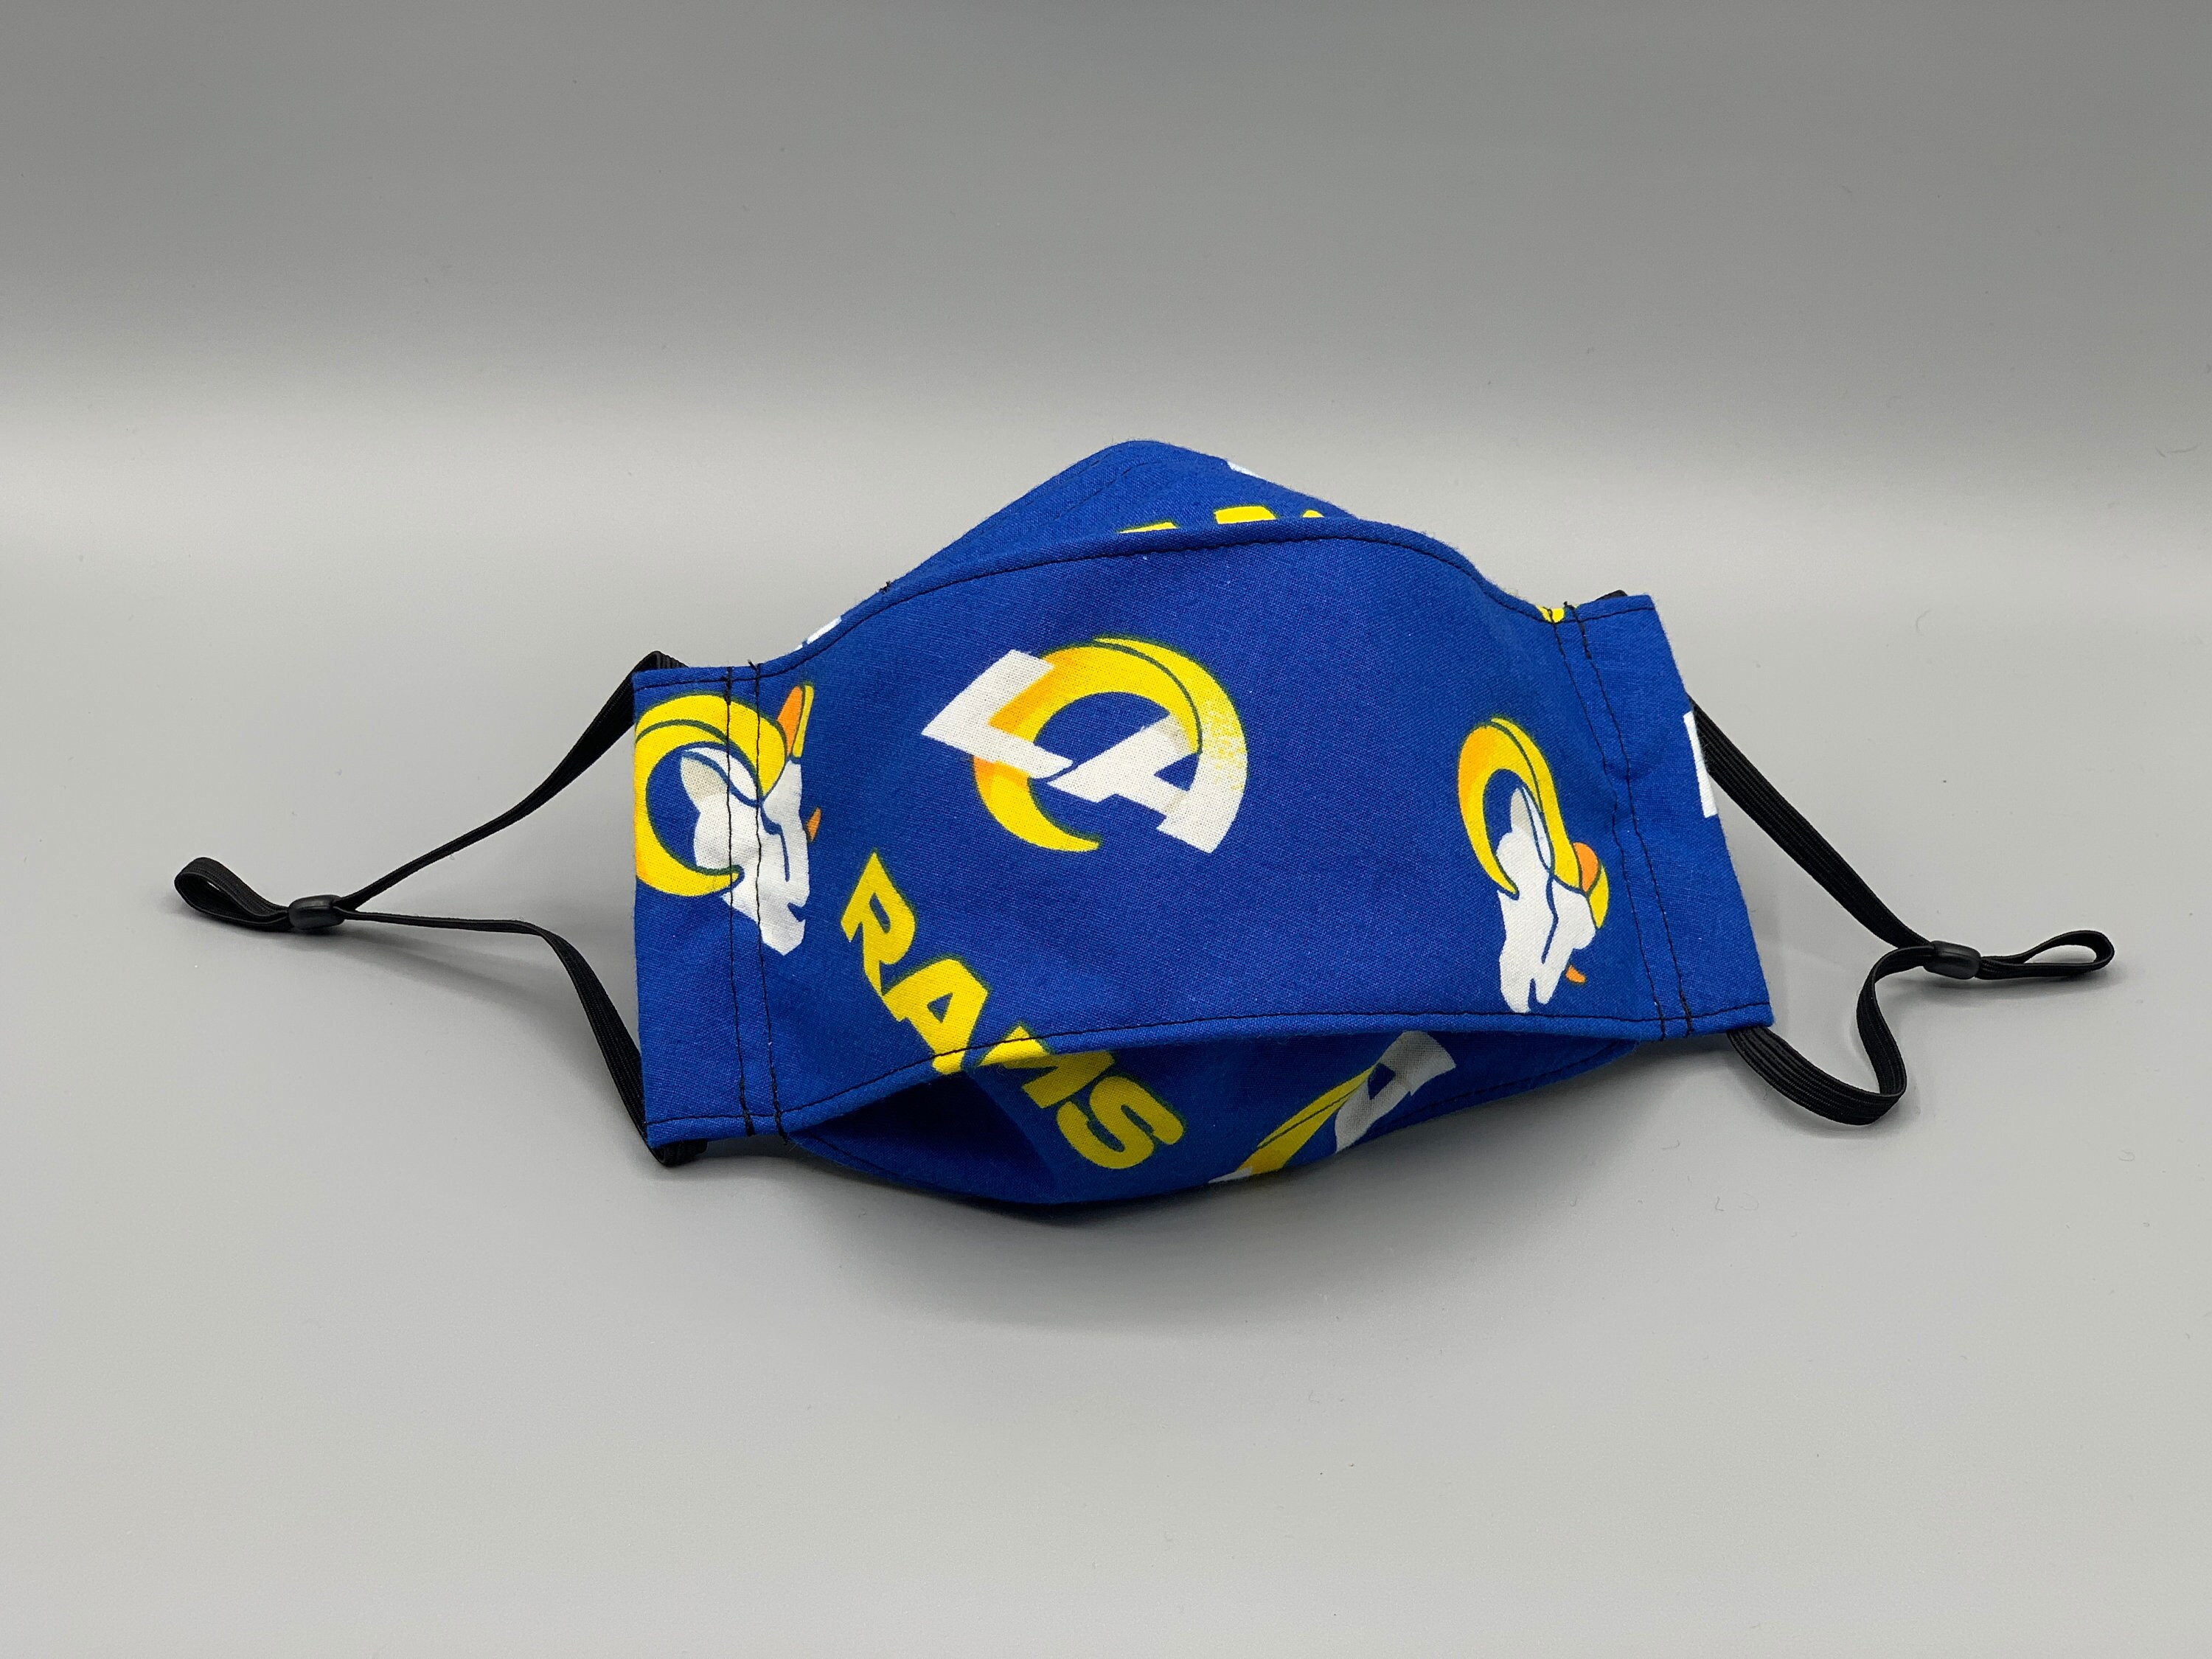 Origami 3D Adult Face Mask With Nose Wire - La Rams Football Team End Glasses Fog Our Comfortable & Adjustable Masks